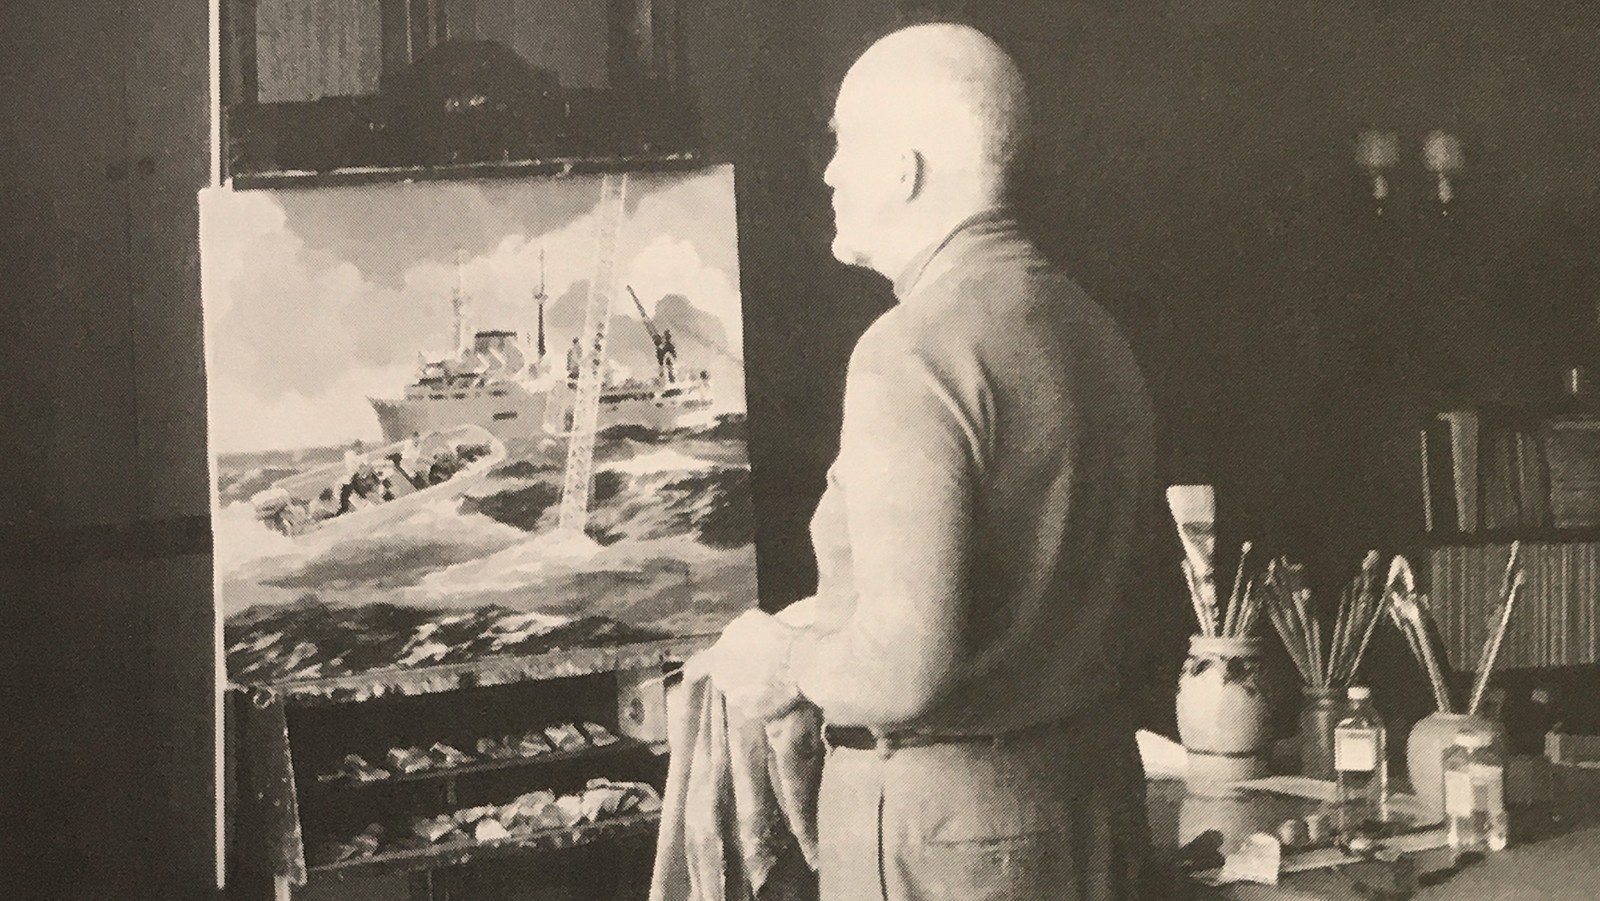 The marine artist Jack Coggins with his oil painting of the Discover and at-sea activities during the 1968 BOMEX operation off Barbados.